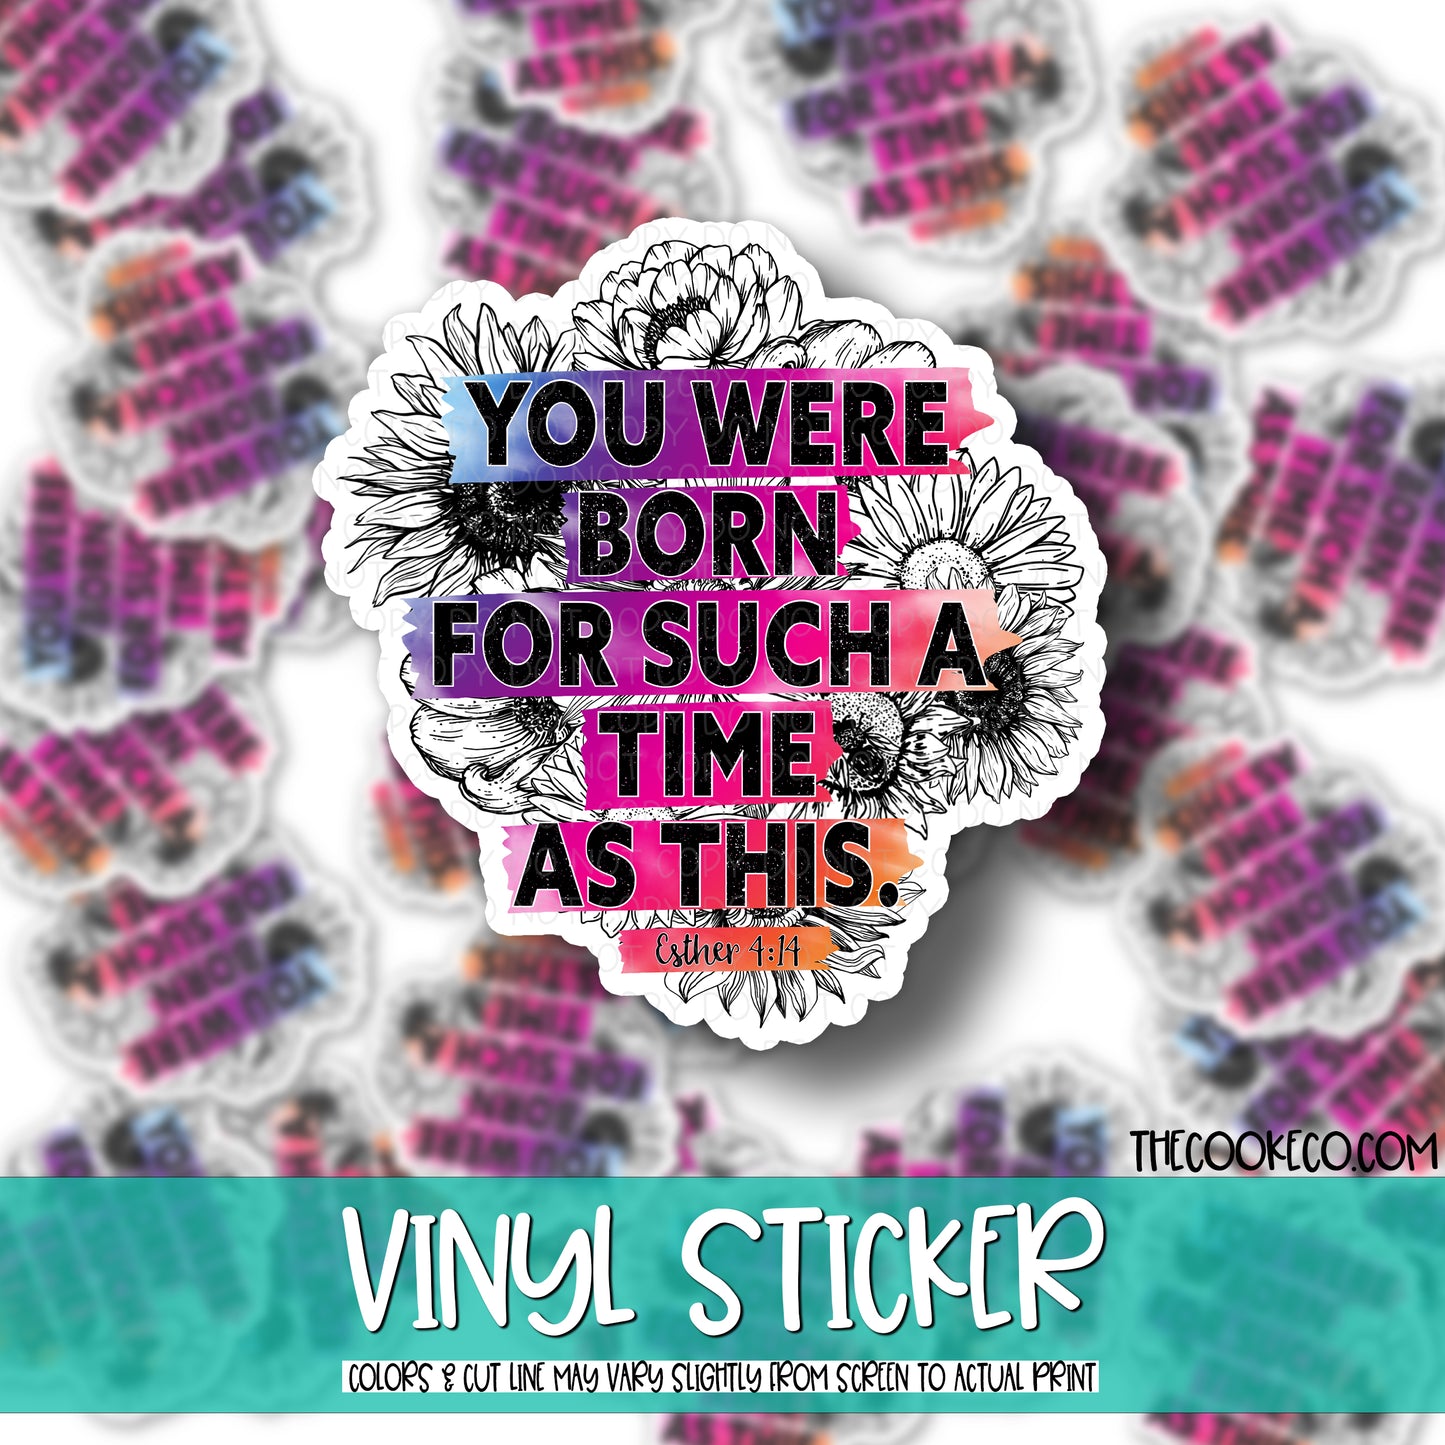 Vinyl Sticker | #V0663 - BORN FOR SUCH A TIME AS THIS